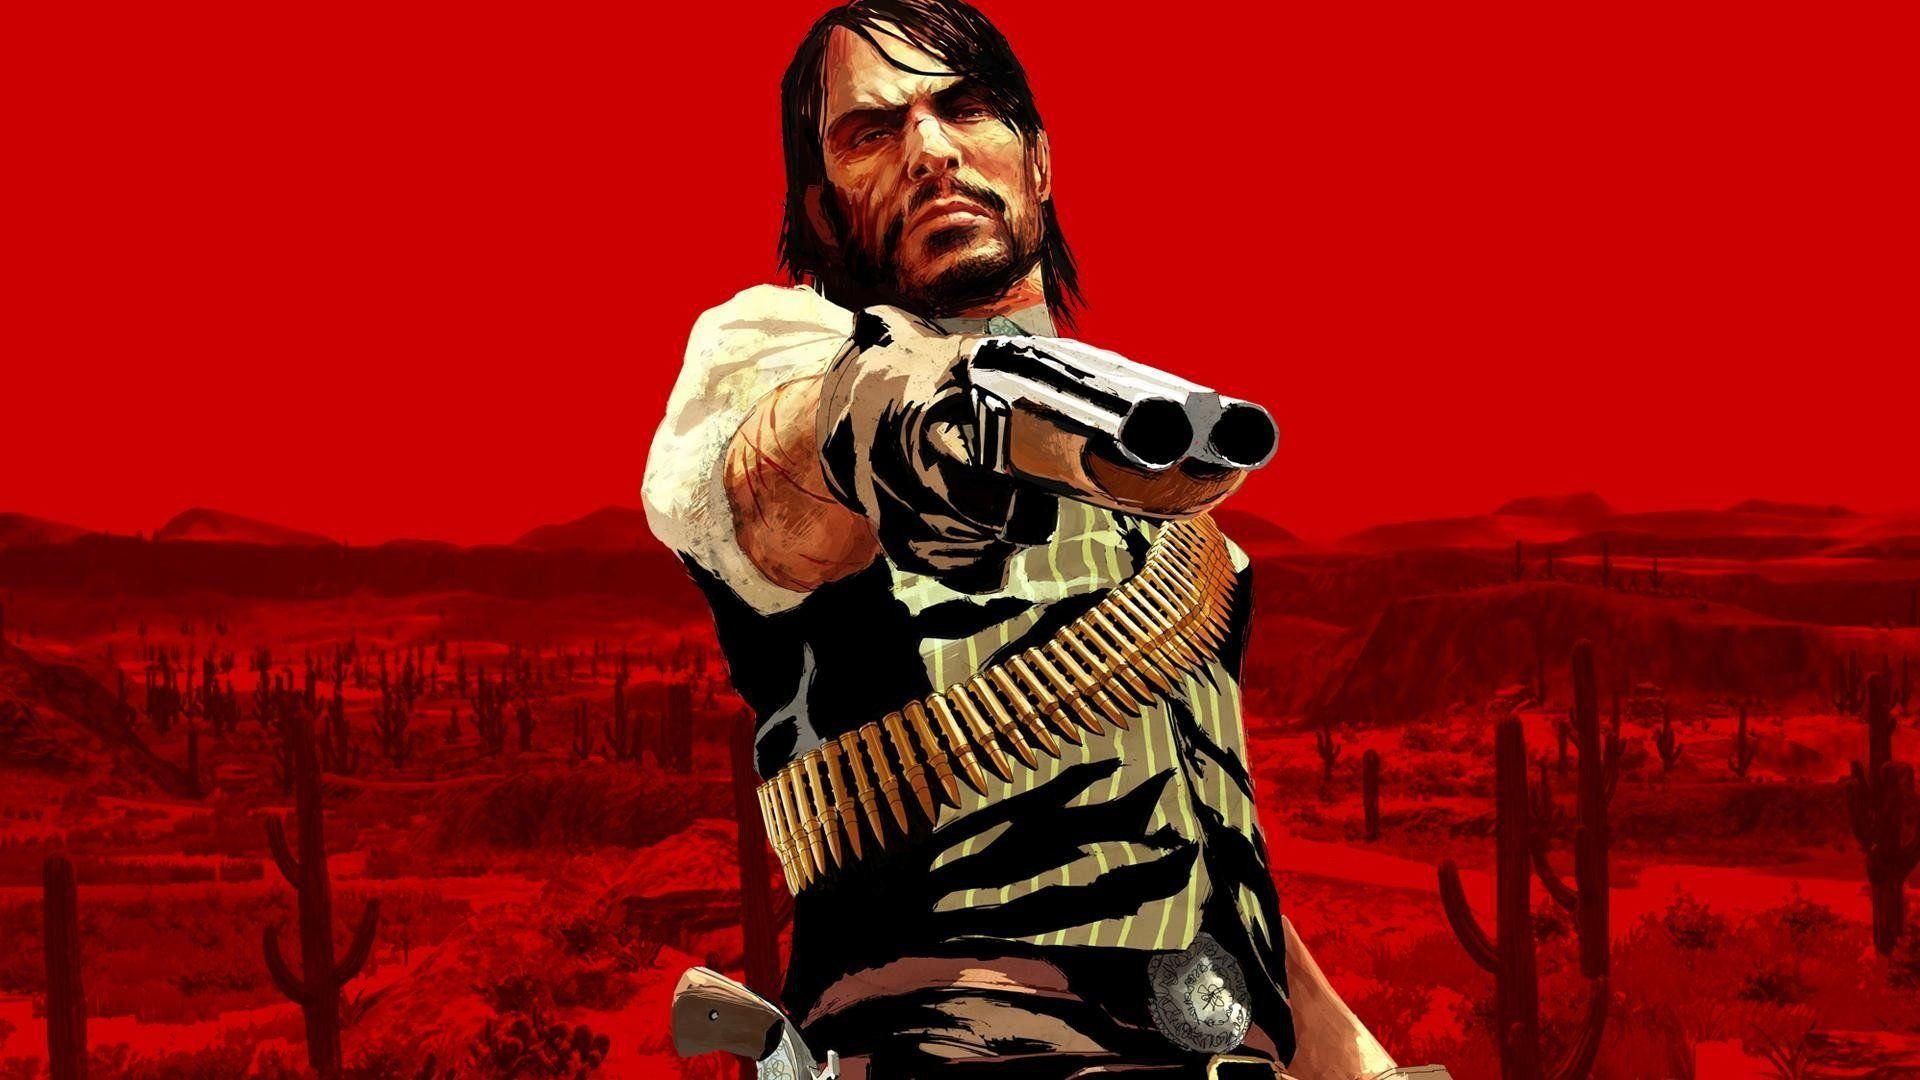 Red Dead Redemption HD Wallpaper and Background Image